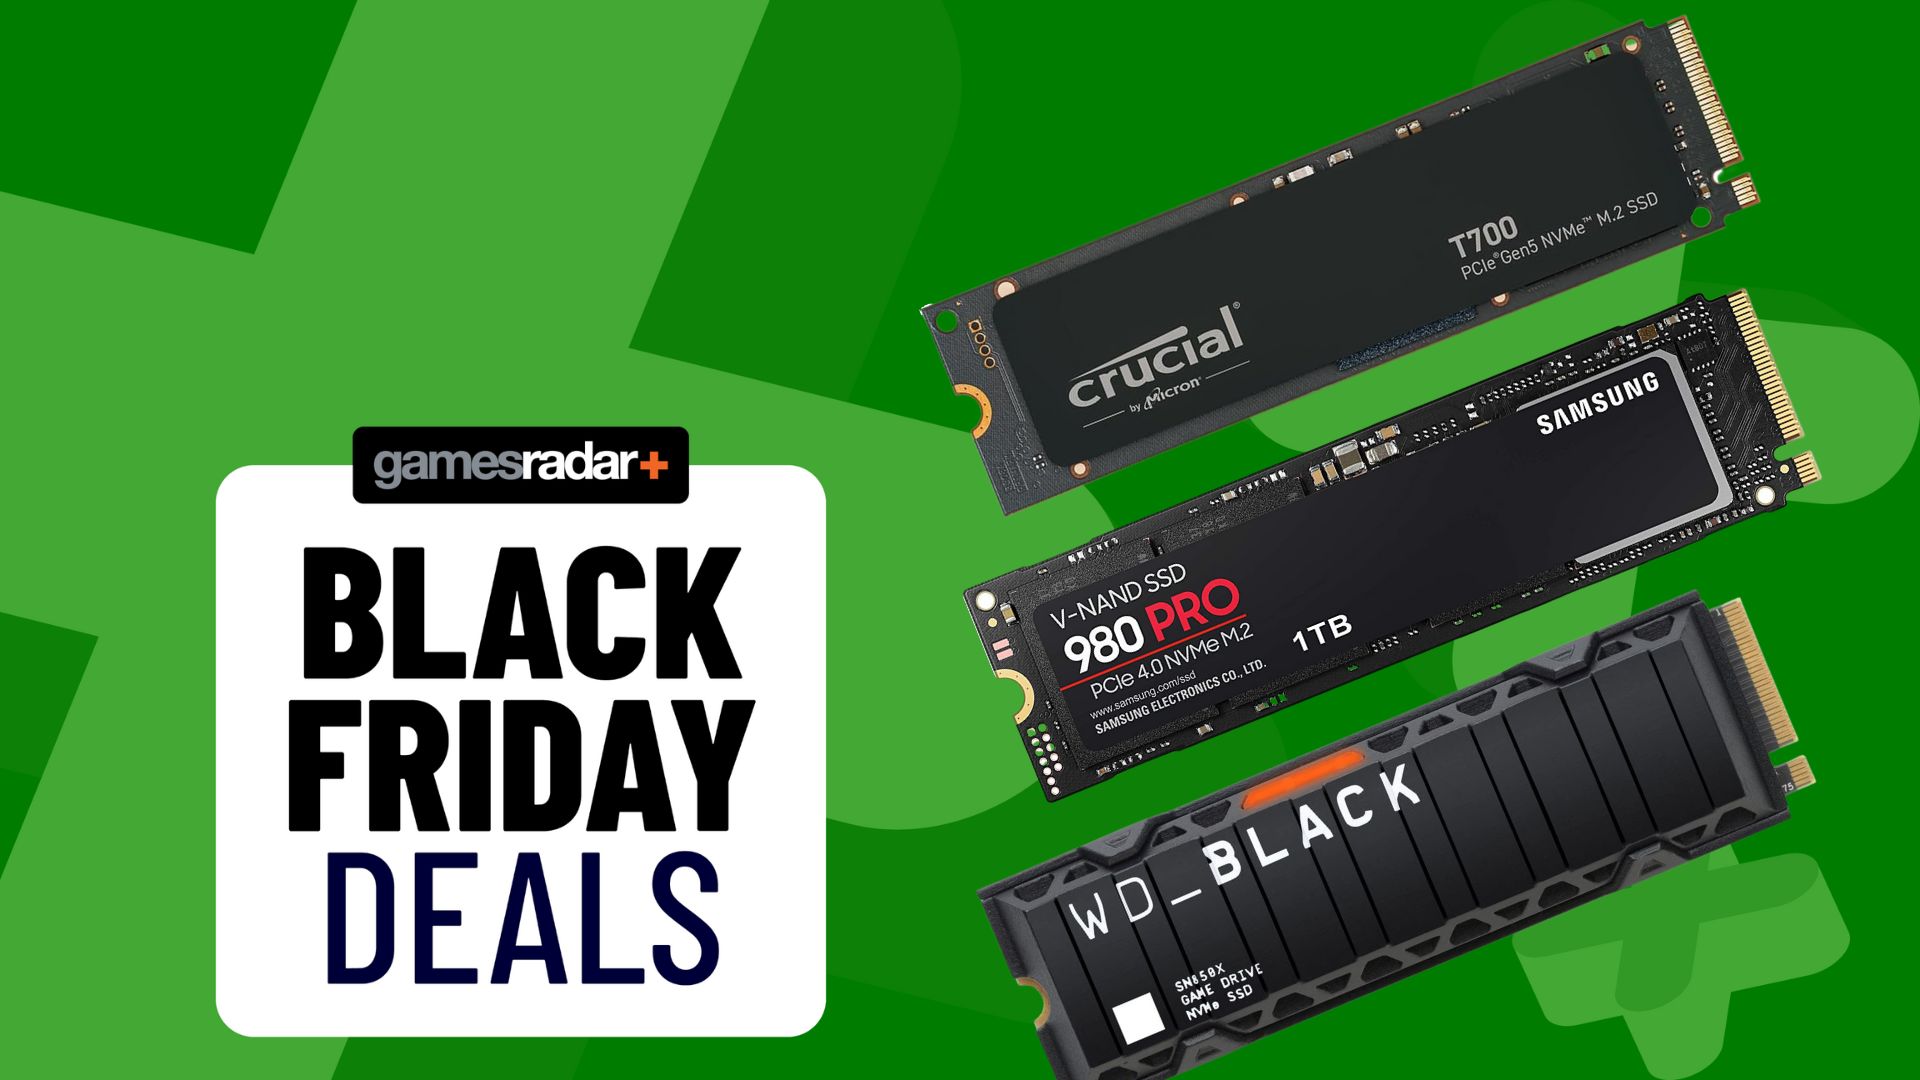 These are the 5 early Black Friday PS5 SSD deals that I'd buy